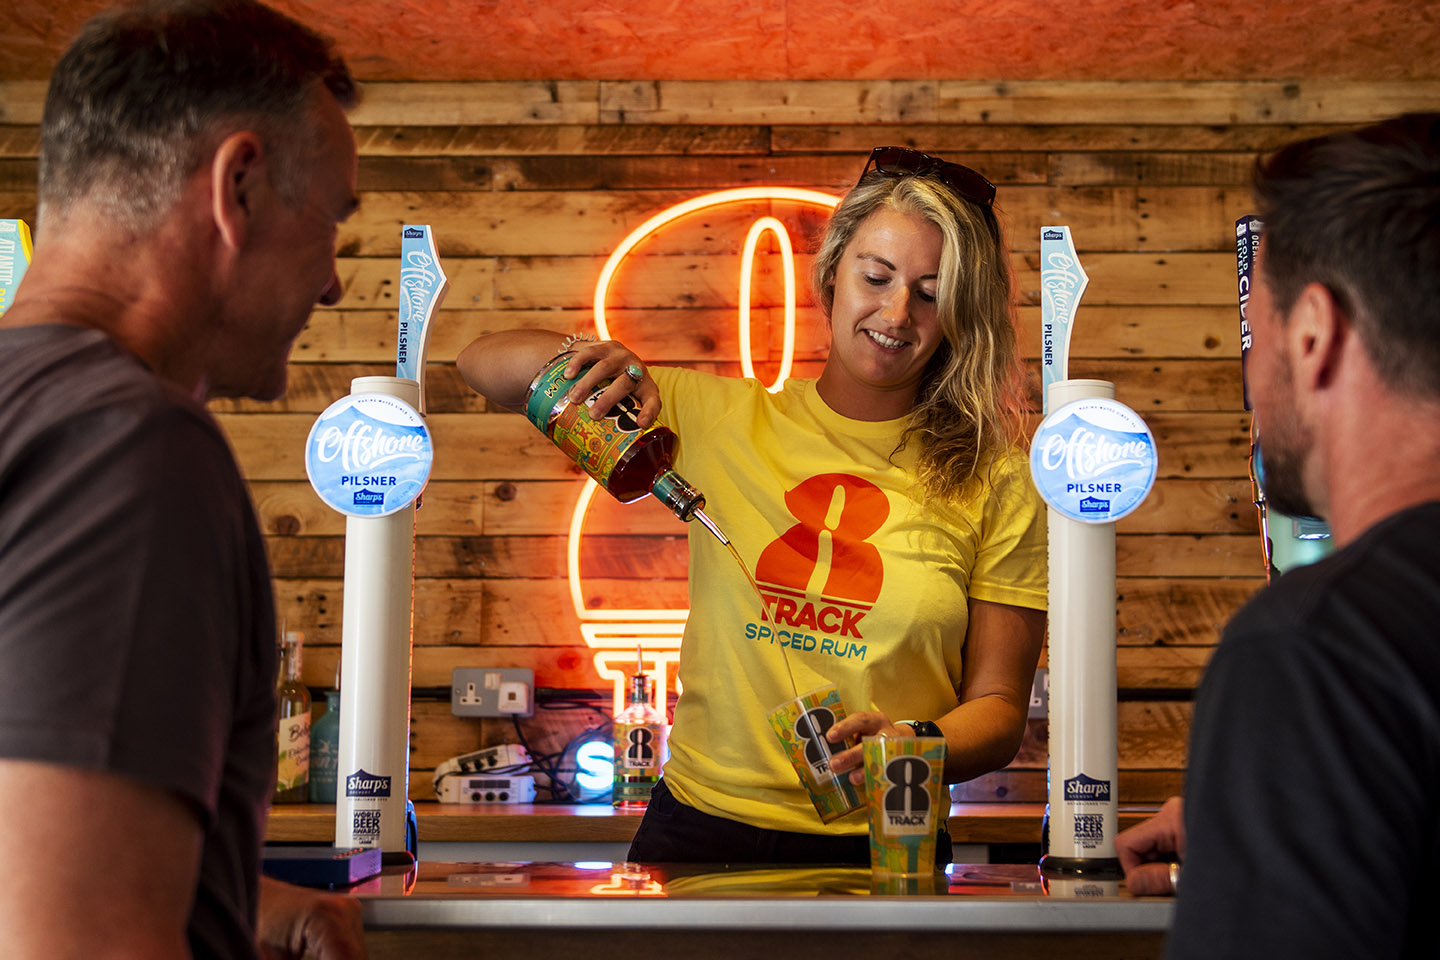 A female bar tender pours 8Track rum from a height into a glass at a bar with two male models looking on. In the background is a neon 8Track logo sign against a timber background.